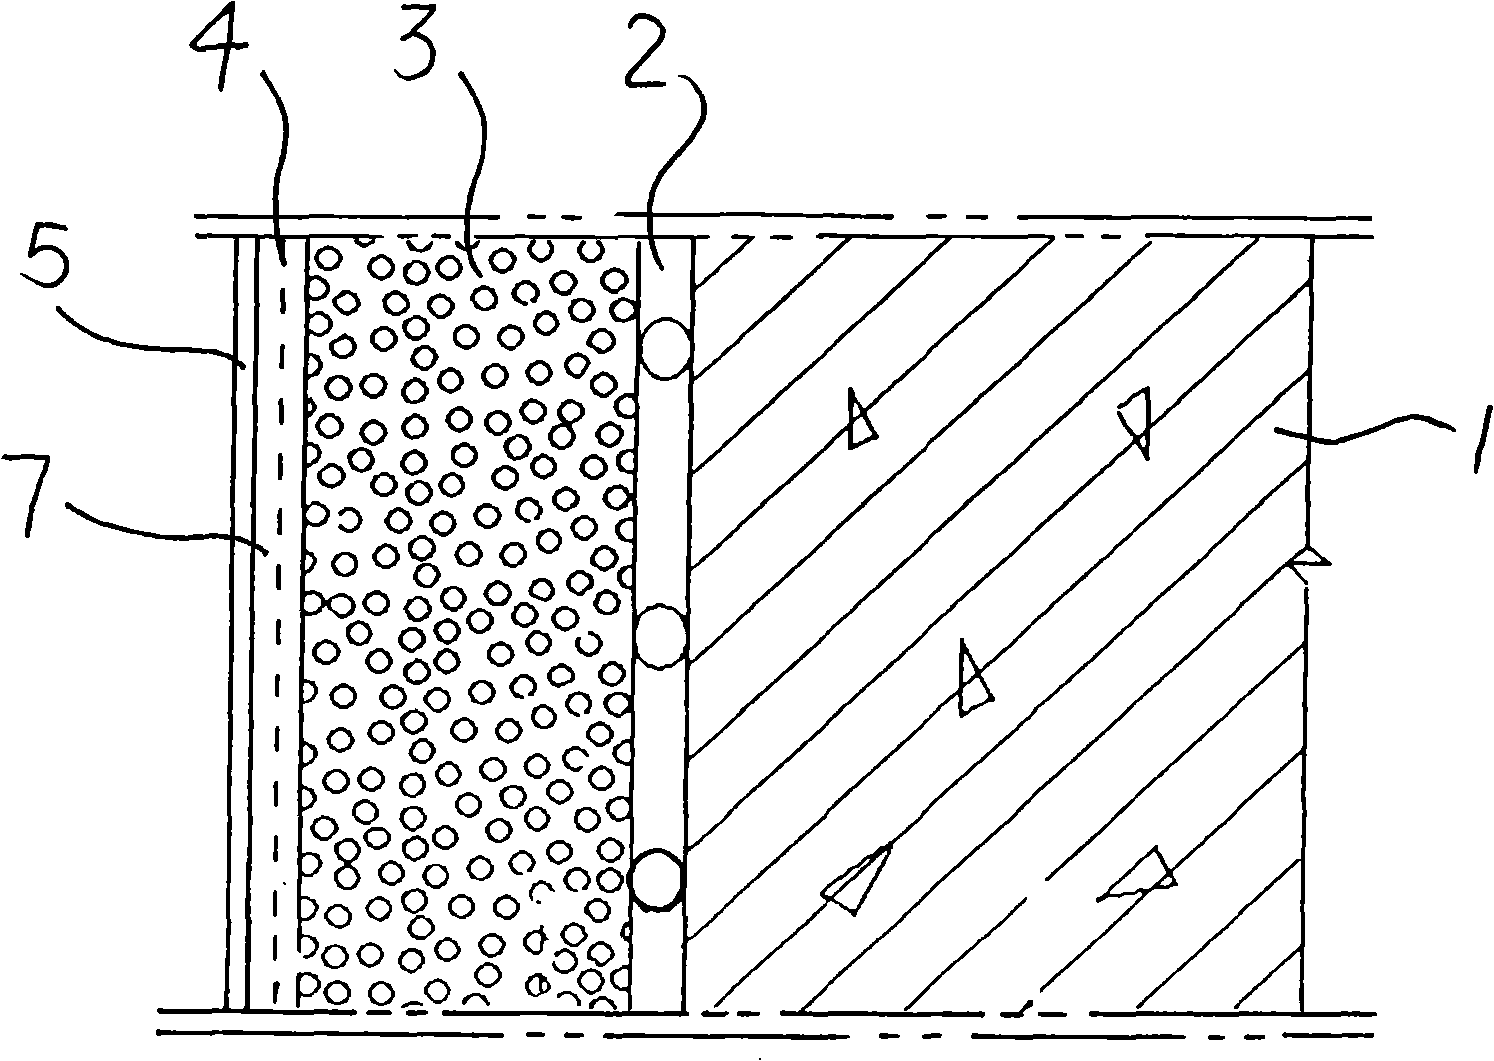 Construction method of building wall